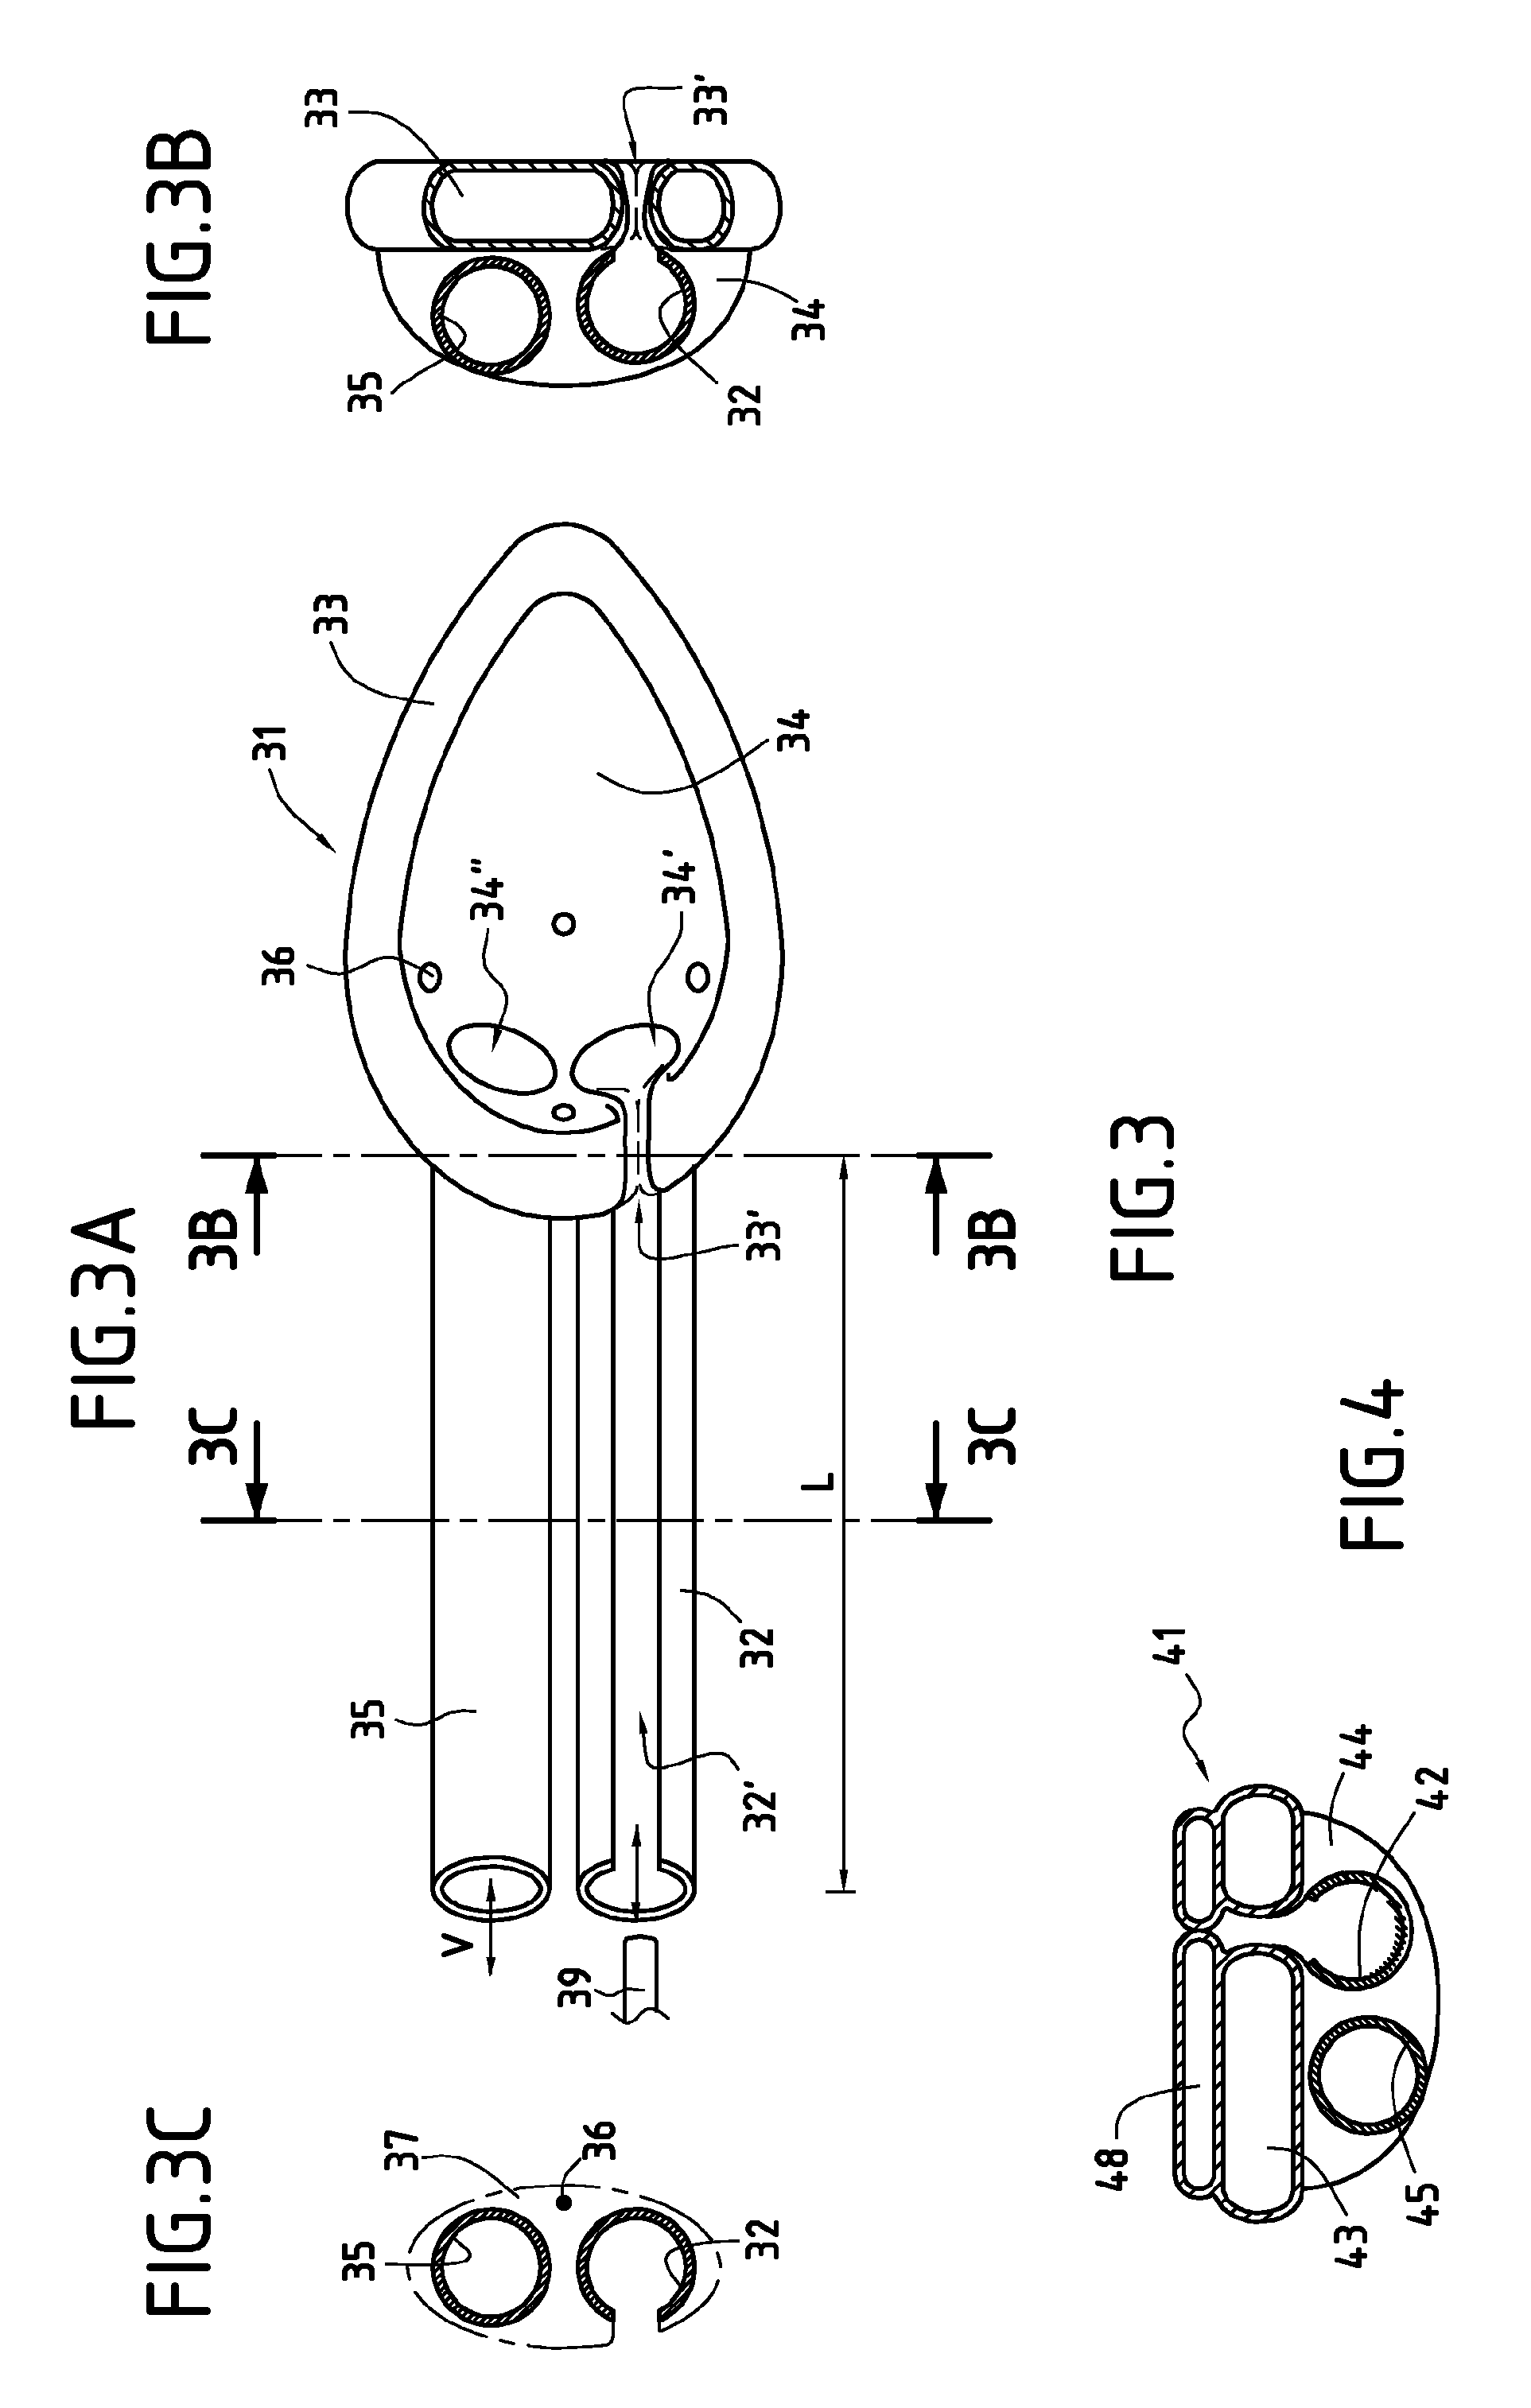 Laryngeal Mask Adapted For the Introduction and Removal of an Intubation Probe